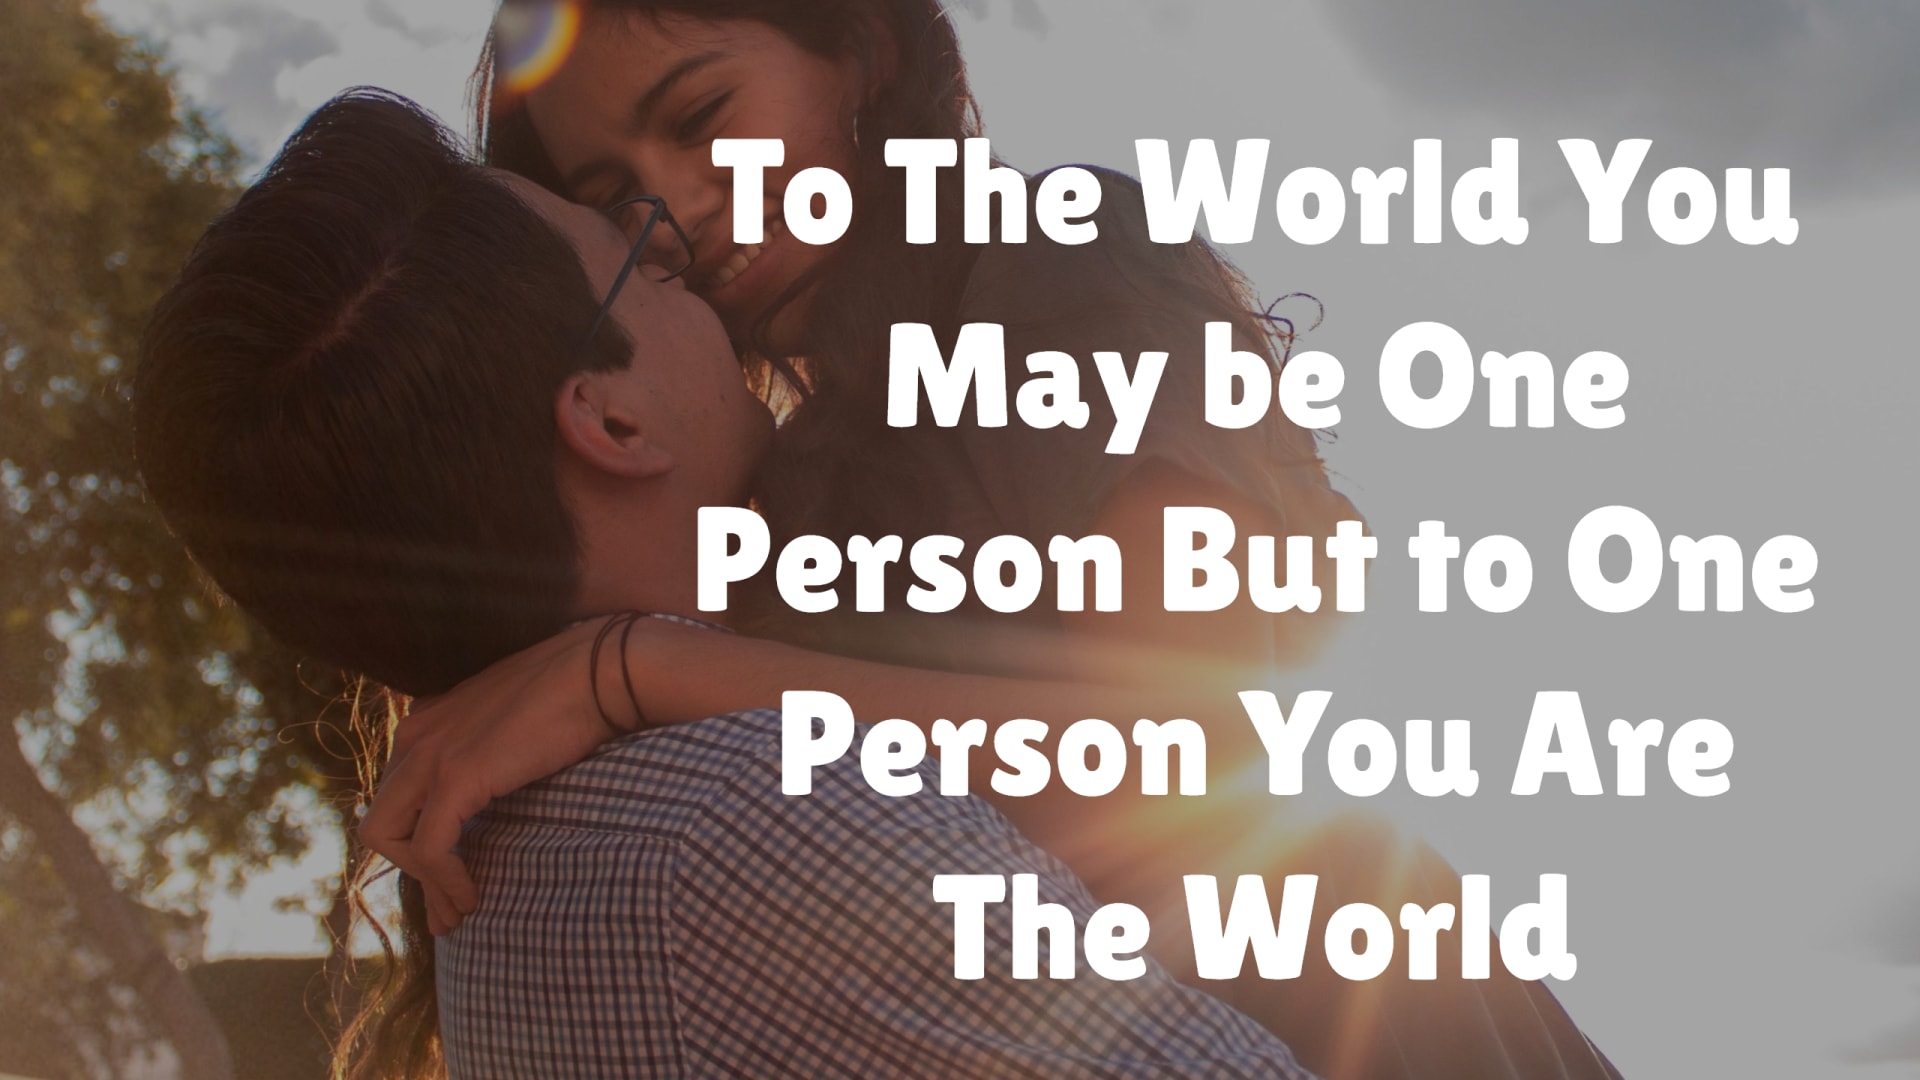 To The World You May be One Person But To One Person You Are The World